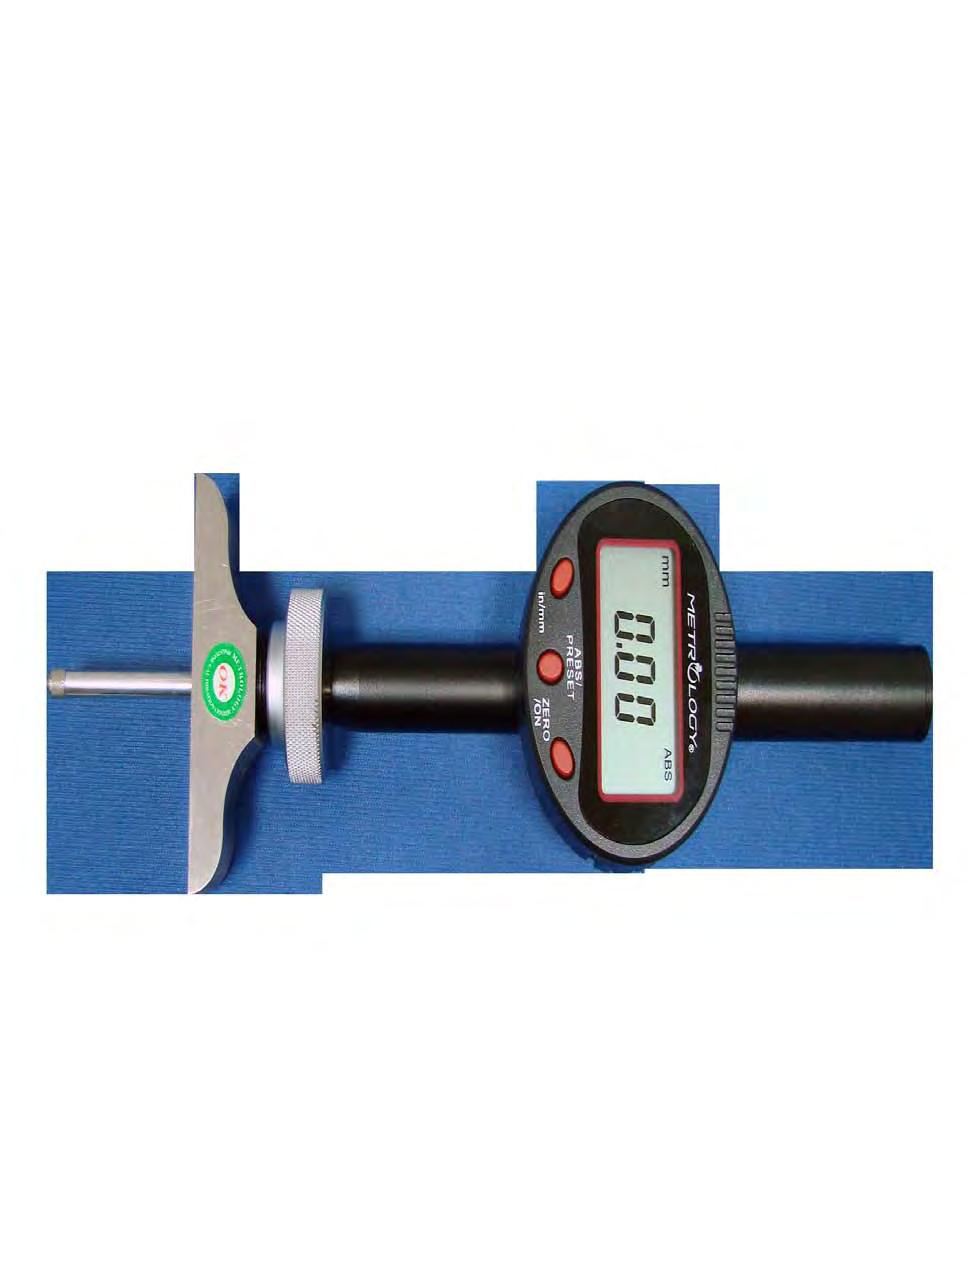 Digital Dial Gauge (Standard) Suitable for pairing up with measuring stands to